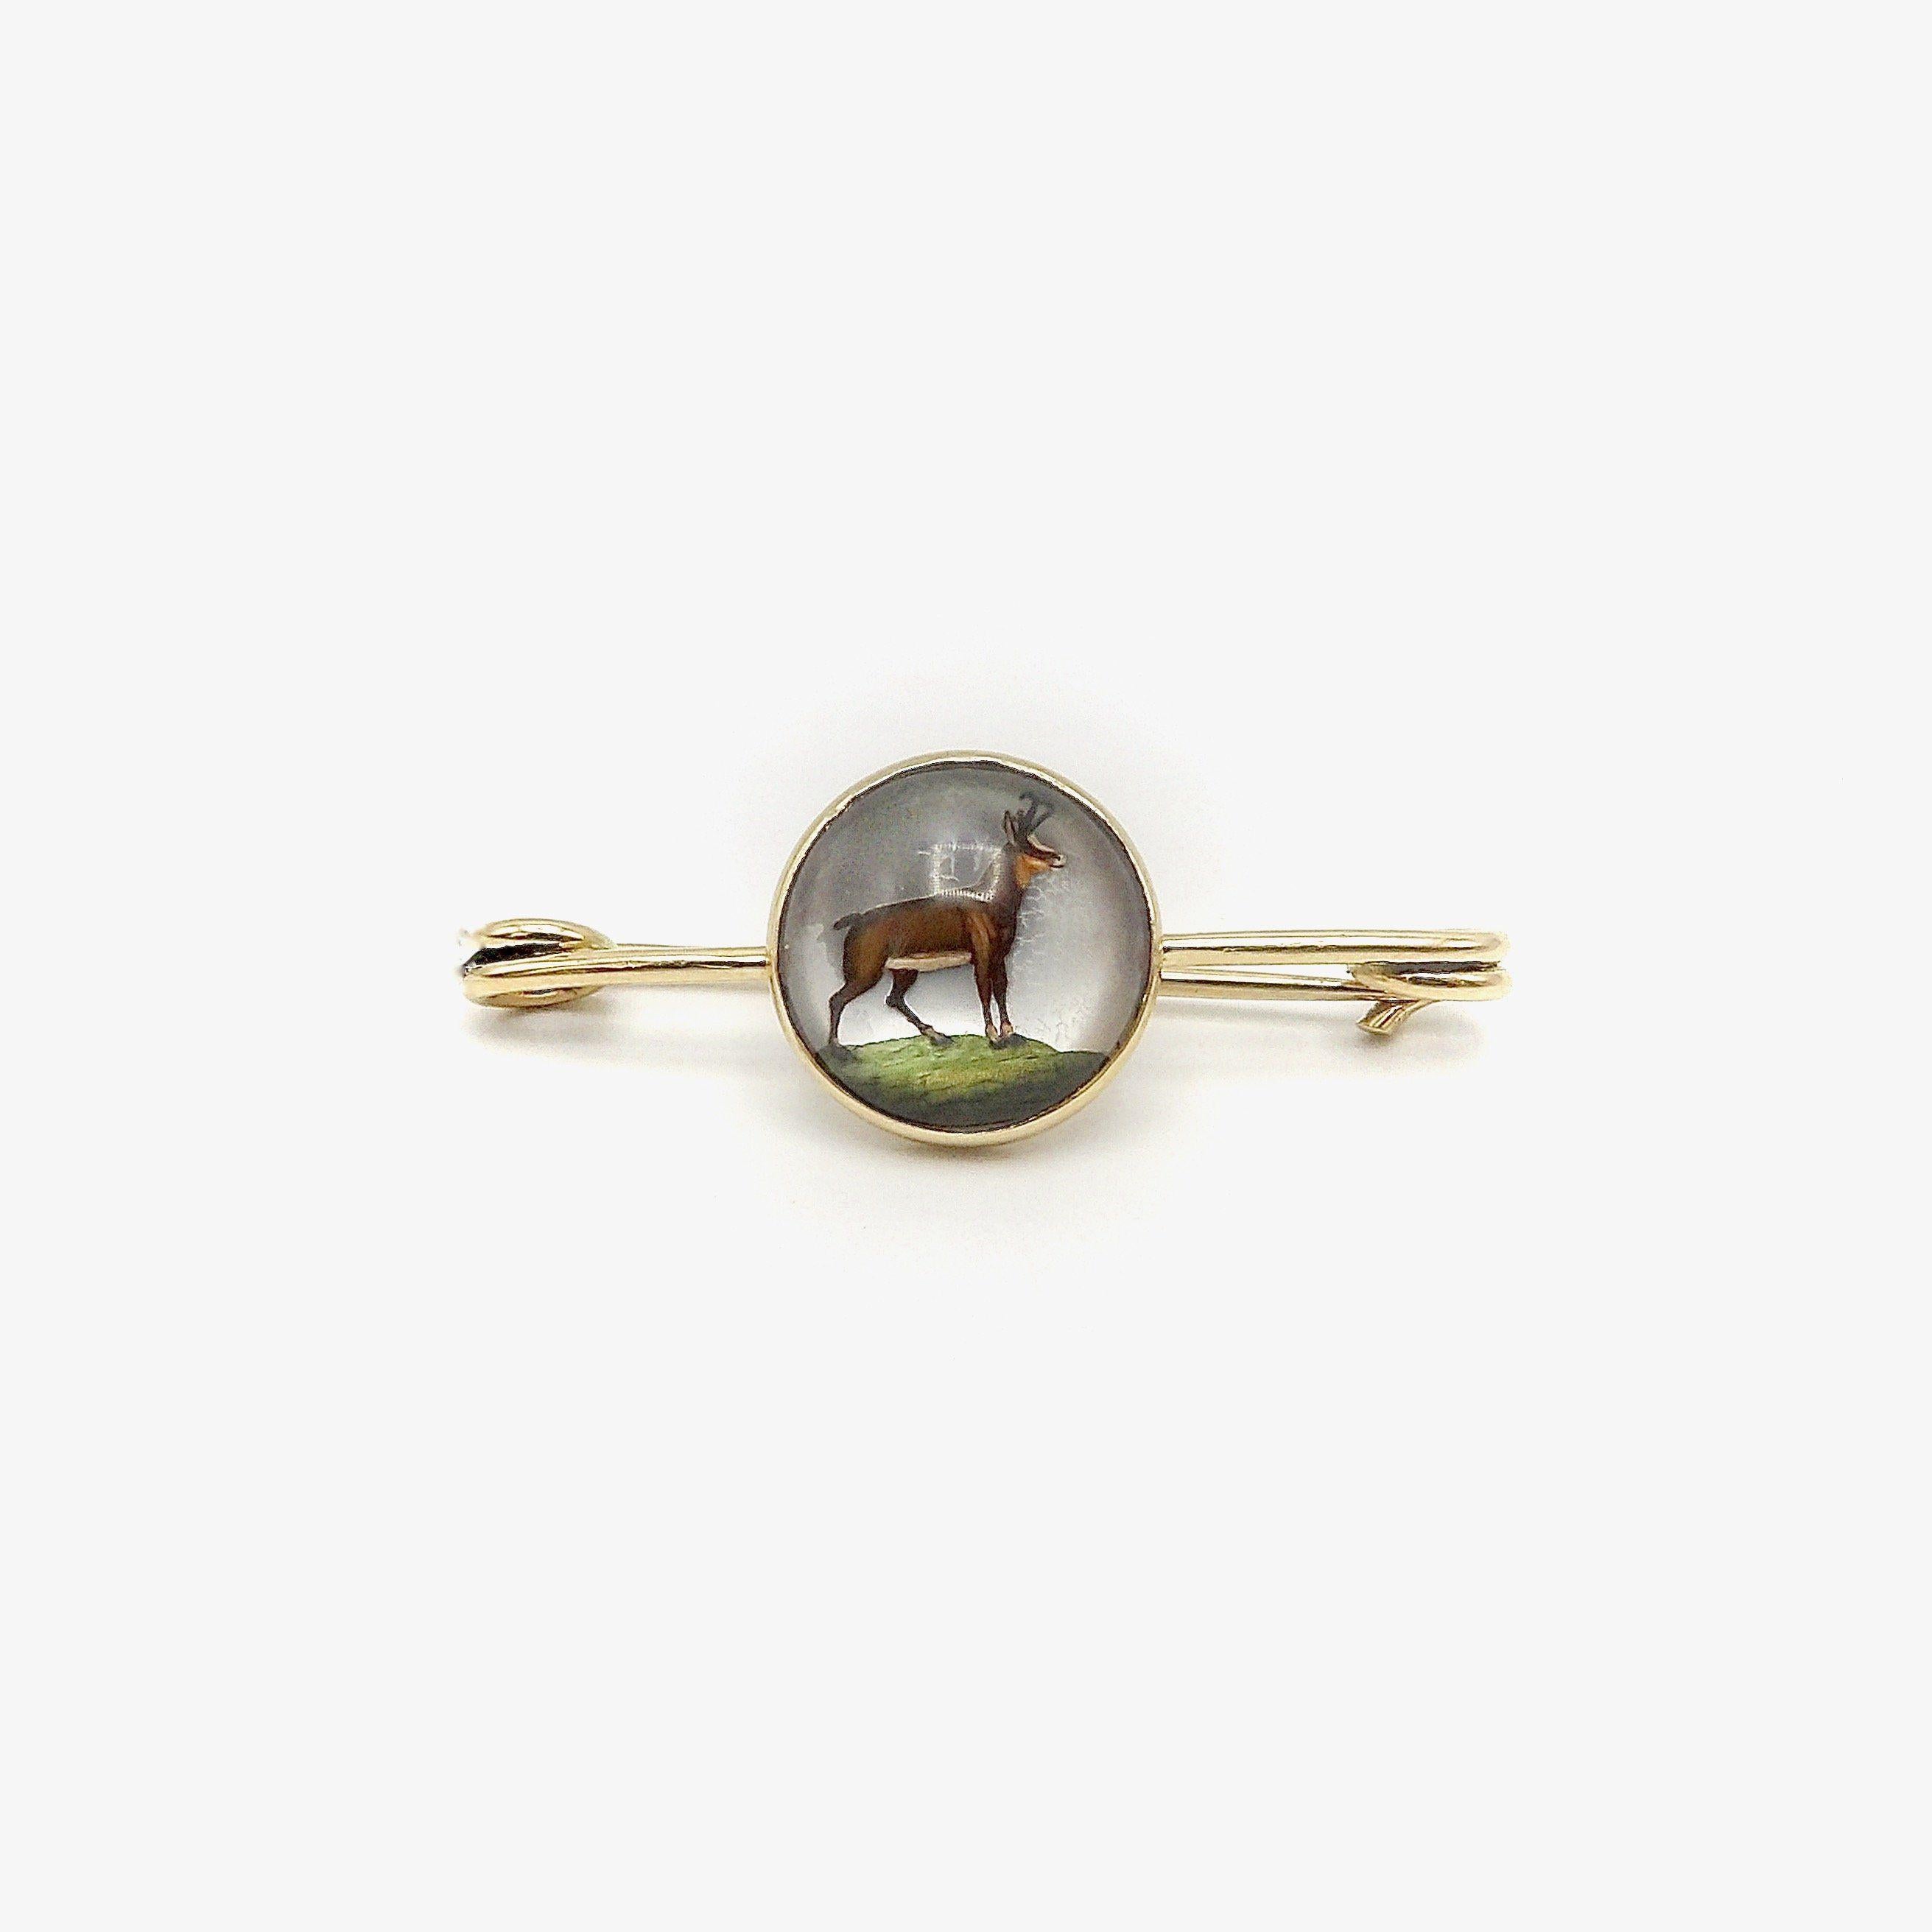 Edwardian 14K Gold Reverse Painted Essex Crystal Antelope Pin In Good Condition For Sale In Venice, CA